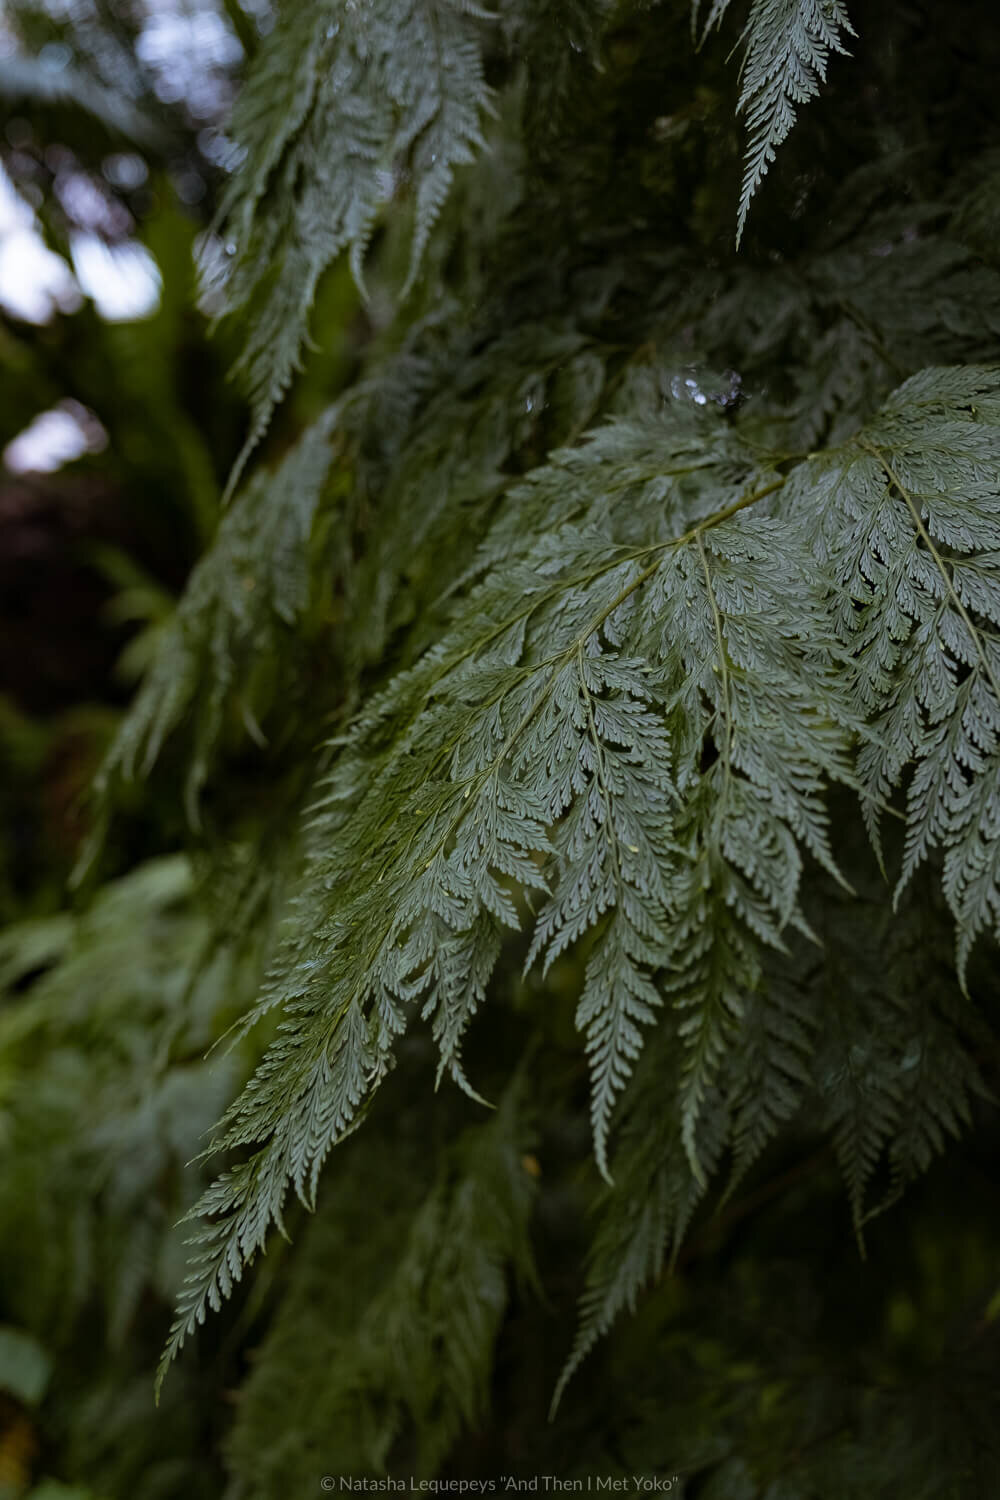 Ferns at the Lincoln Park Conservatory in Chicago, USA. Travel photography and guide by © Natasha Lequepeys for "And Then I Met Yoko". #chicago #usa #travelblog #travelphotography